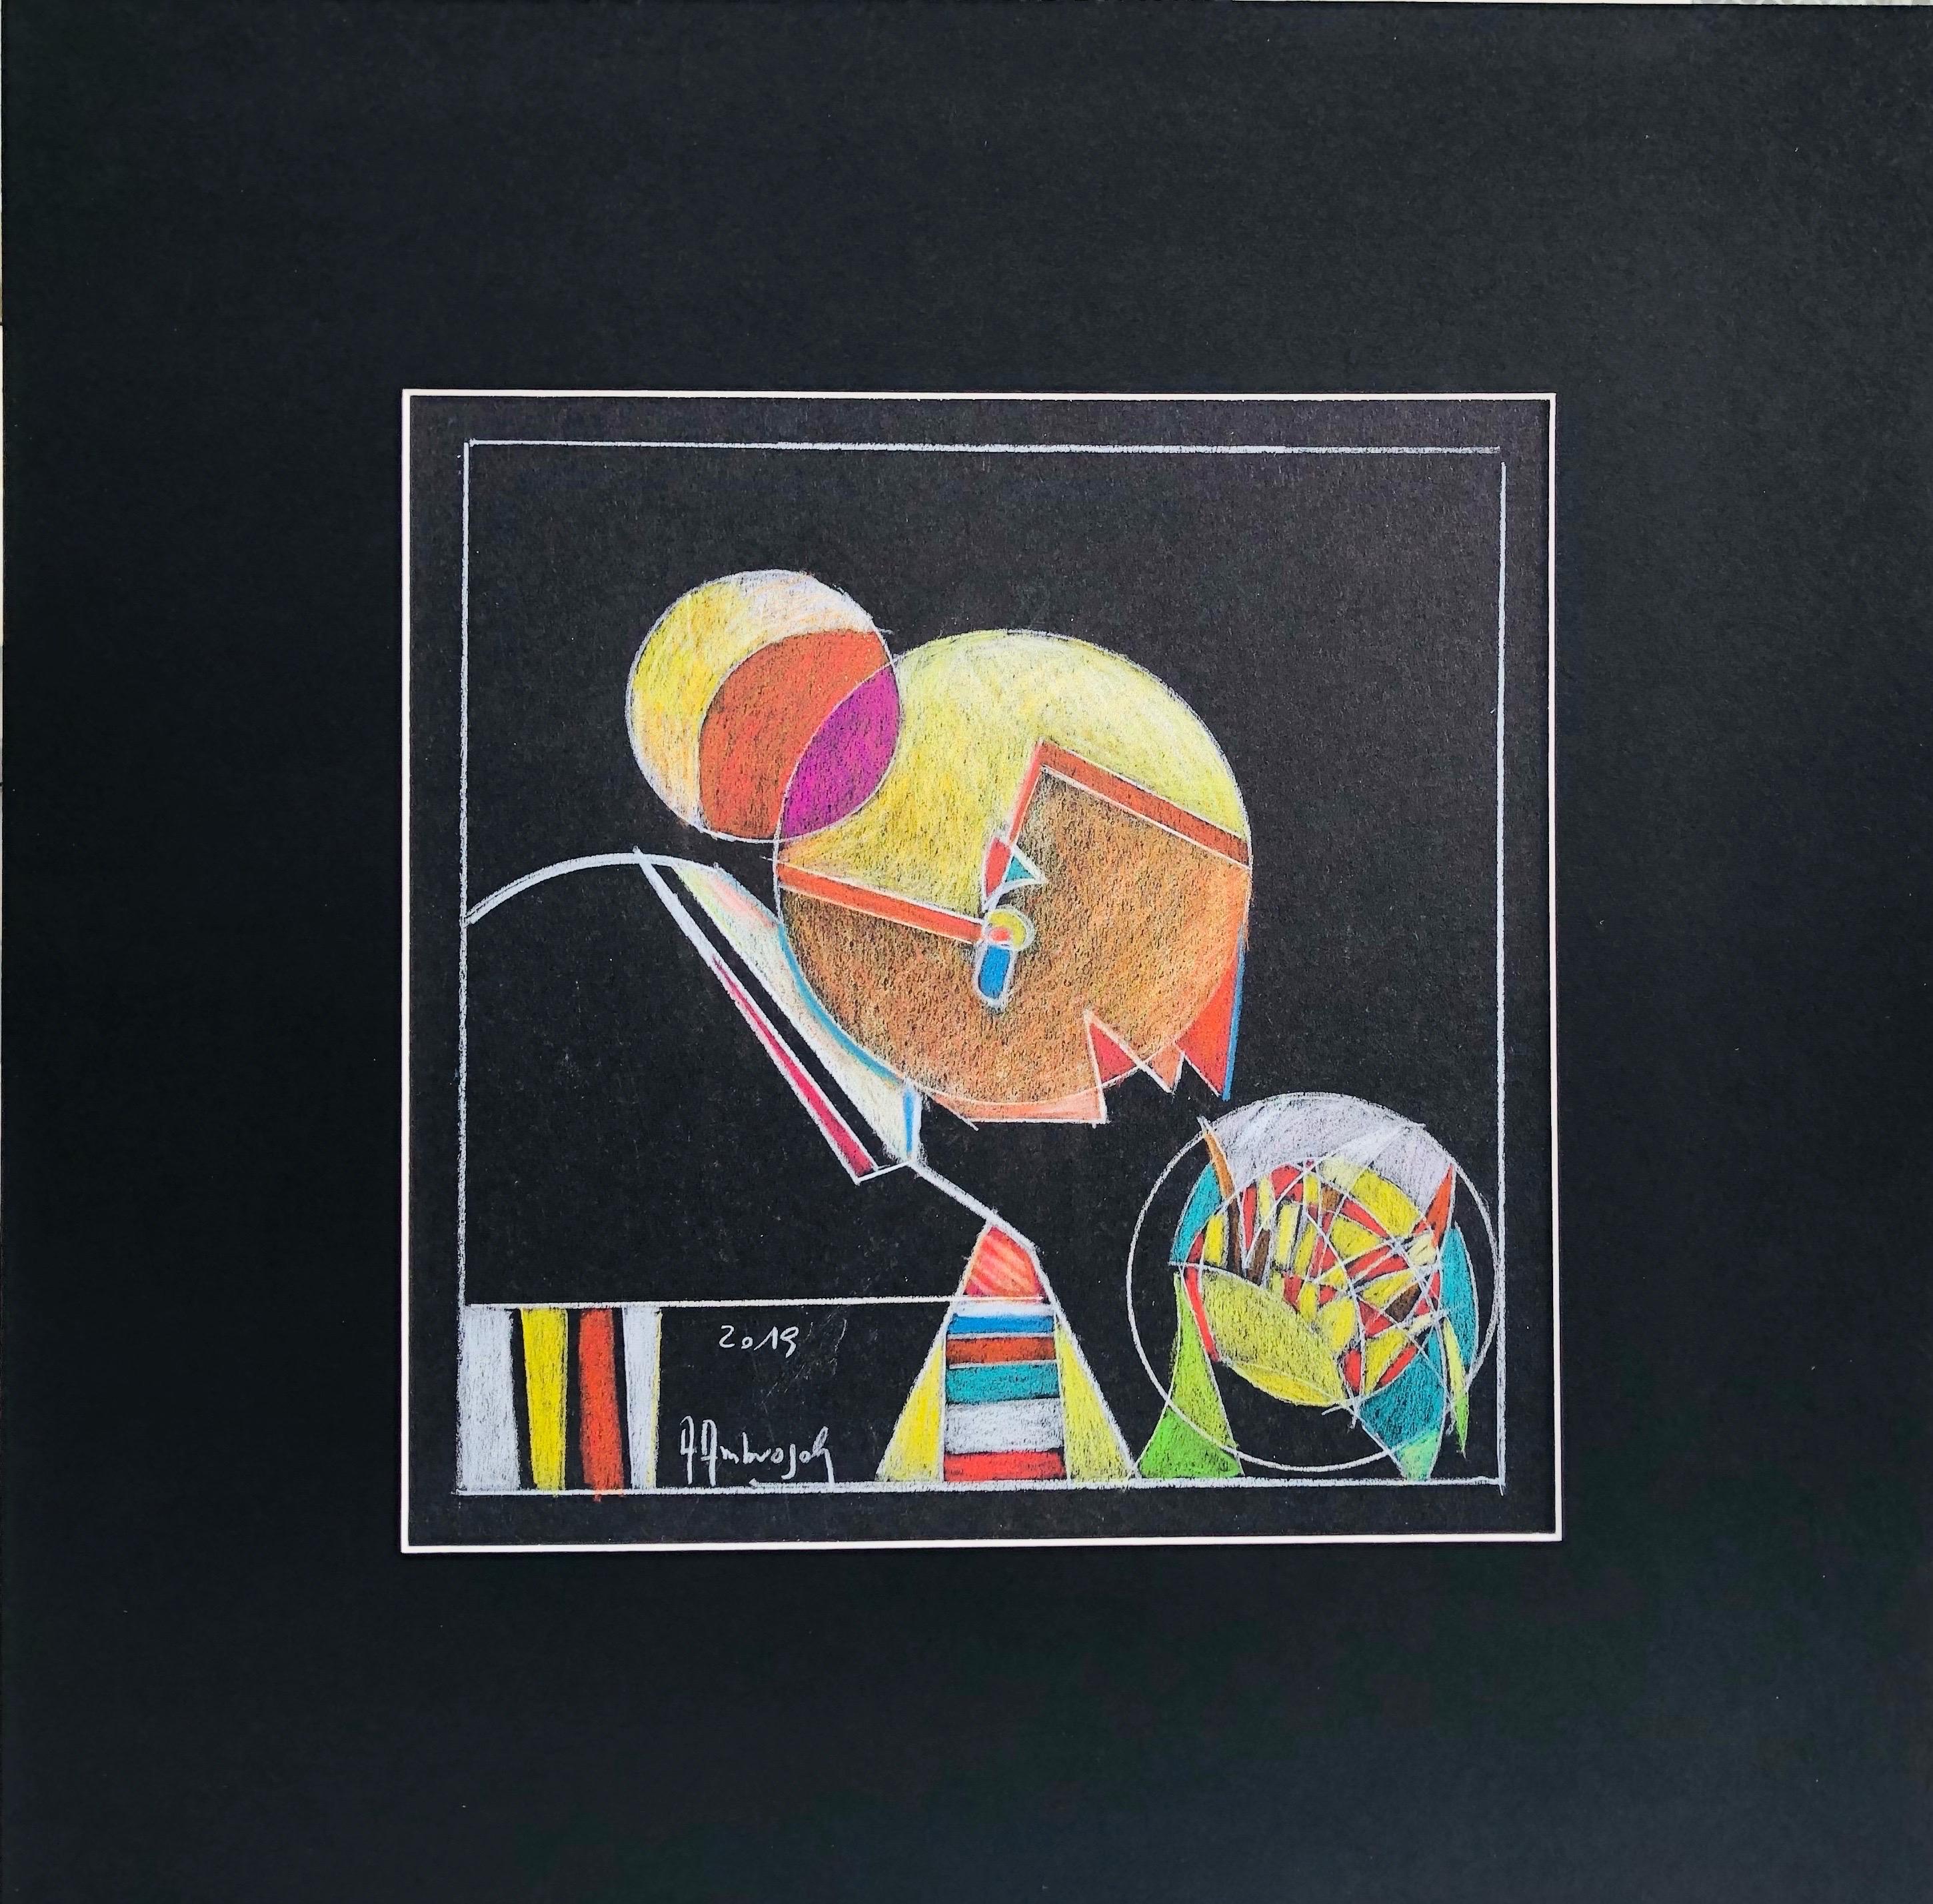 Crystal Ball (2019), cm 21x21, by contemporary artist Annemarie Ambrosoli, is a colored drawing with color pencil on a black cardboard framed with a black frame, that measures 41,5x41,5x7cm.
This drawing is a one-of-a-kind piece.
It is signed in the